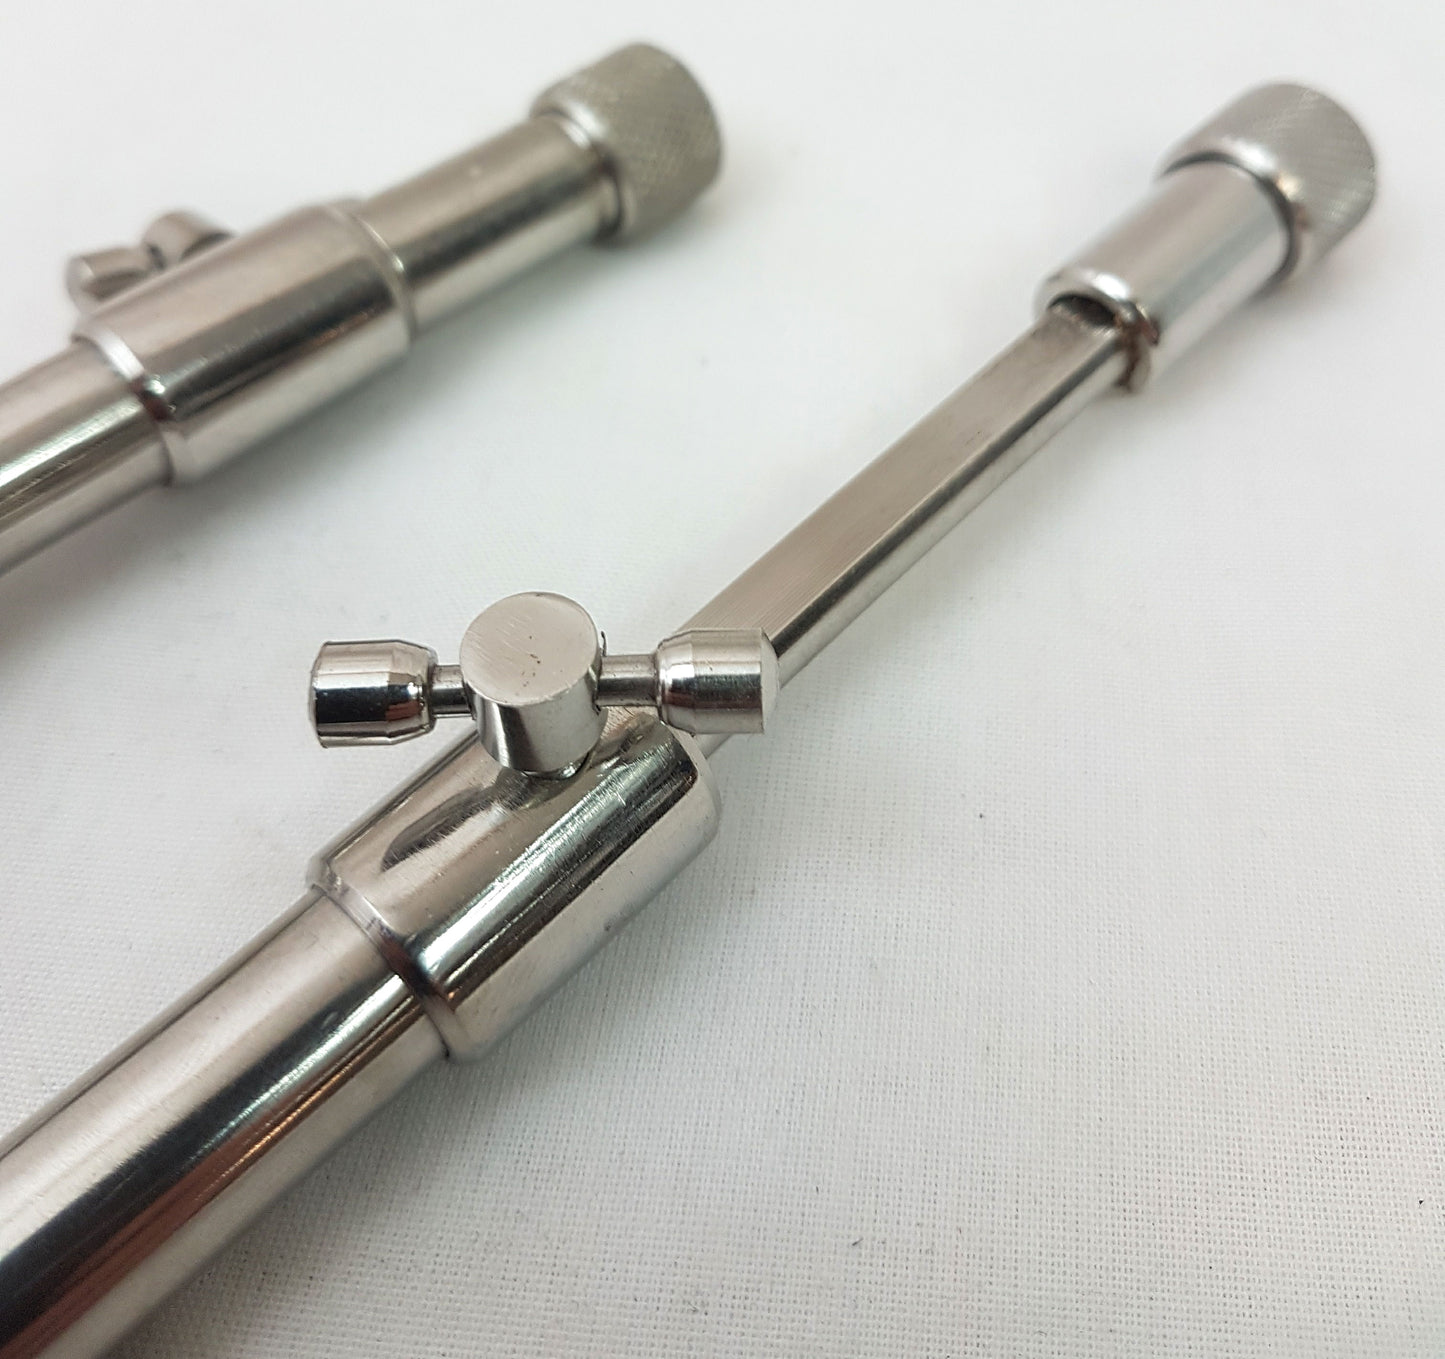 BISON TELESCOPIC POCKET ROD POD ADAPTERS - STAINLESS STEEL OR CARBON